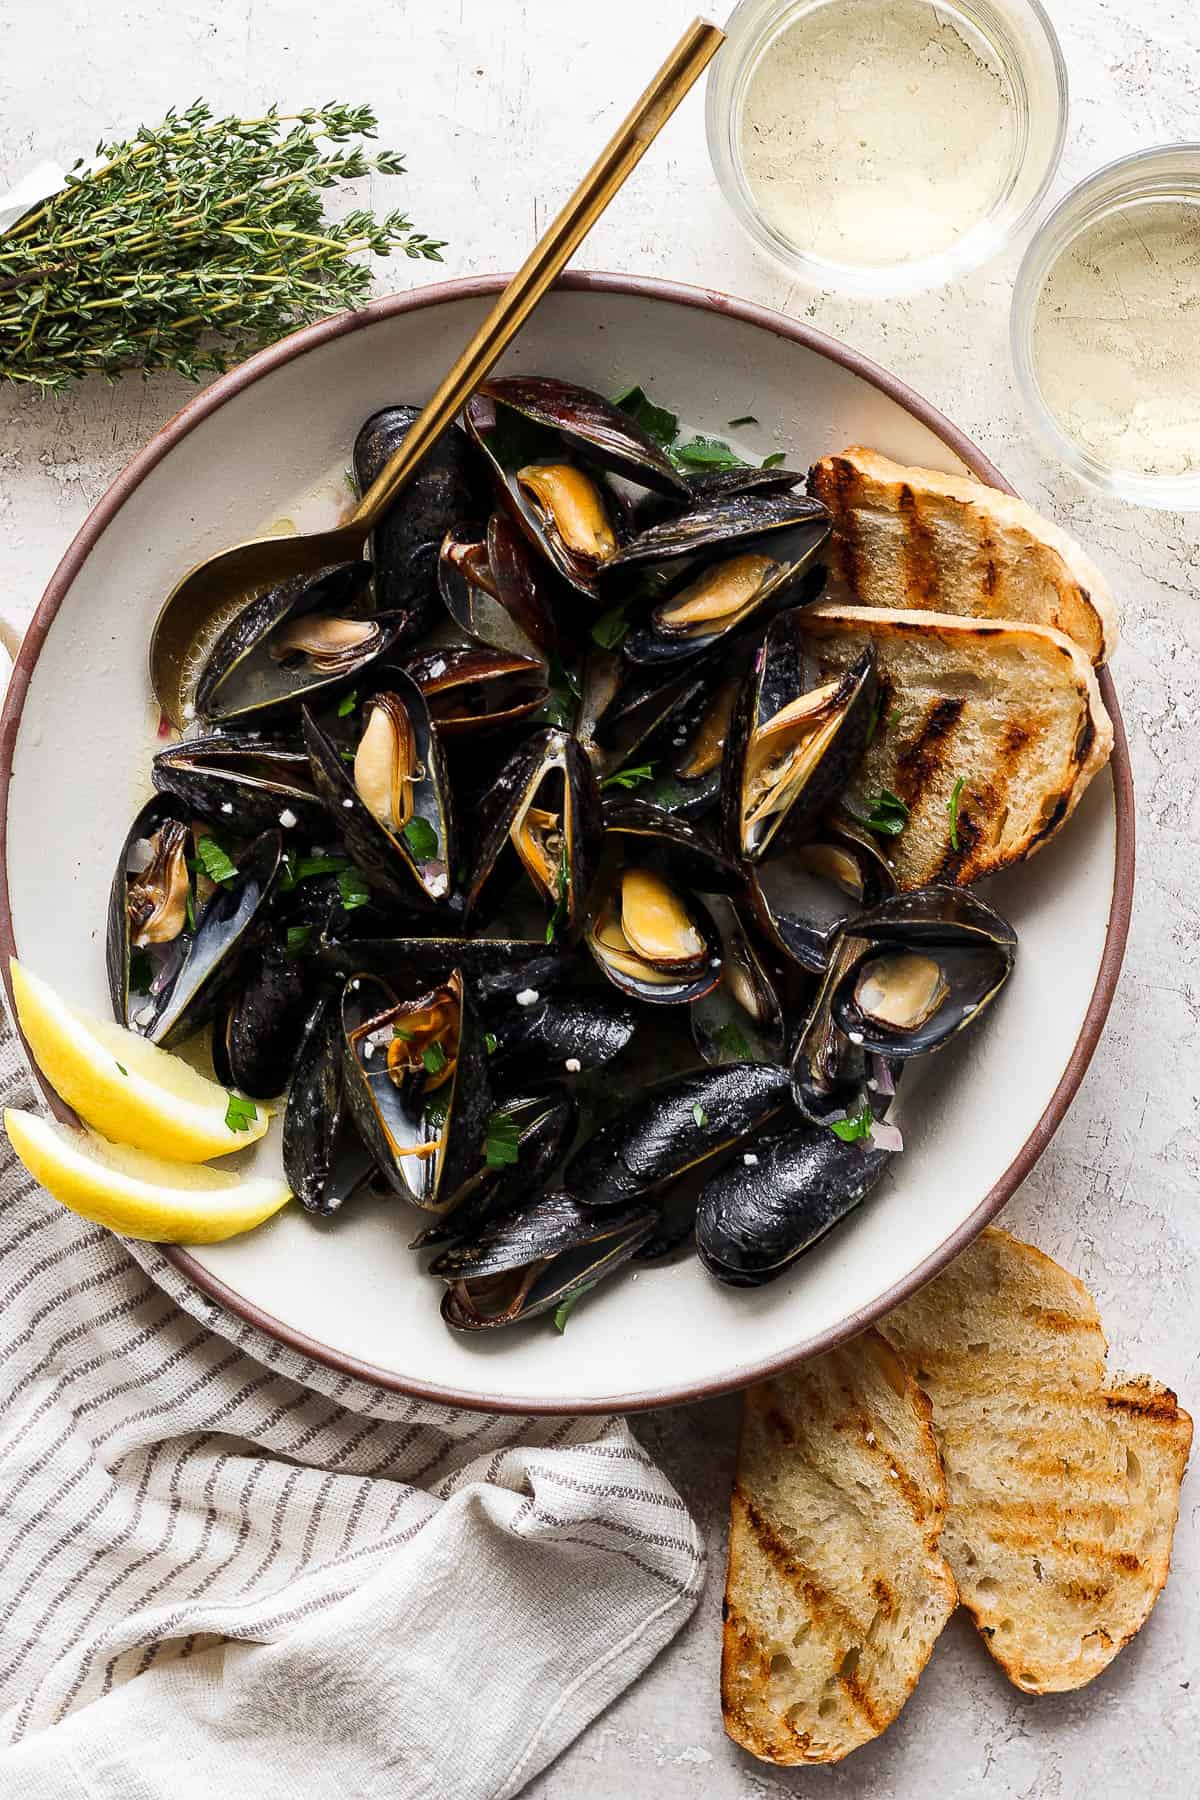 A shallow bowl of mussels with white wine sauce.